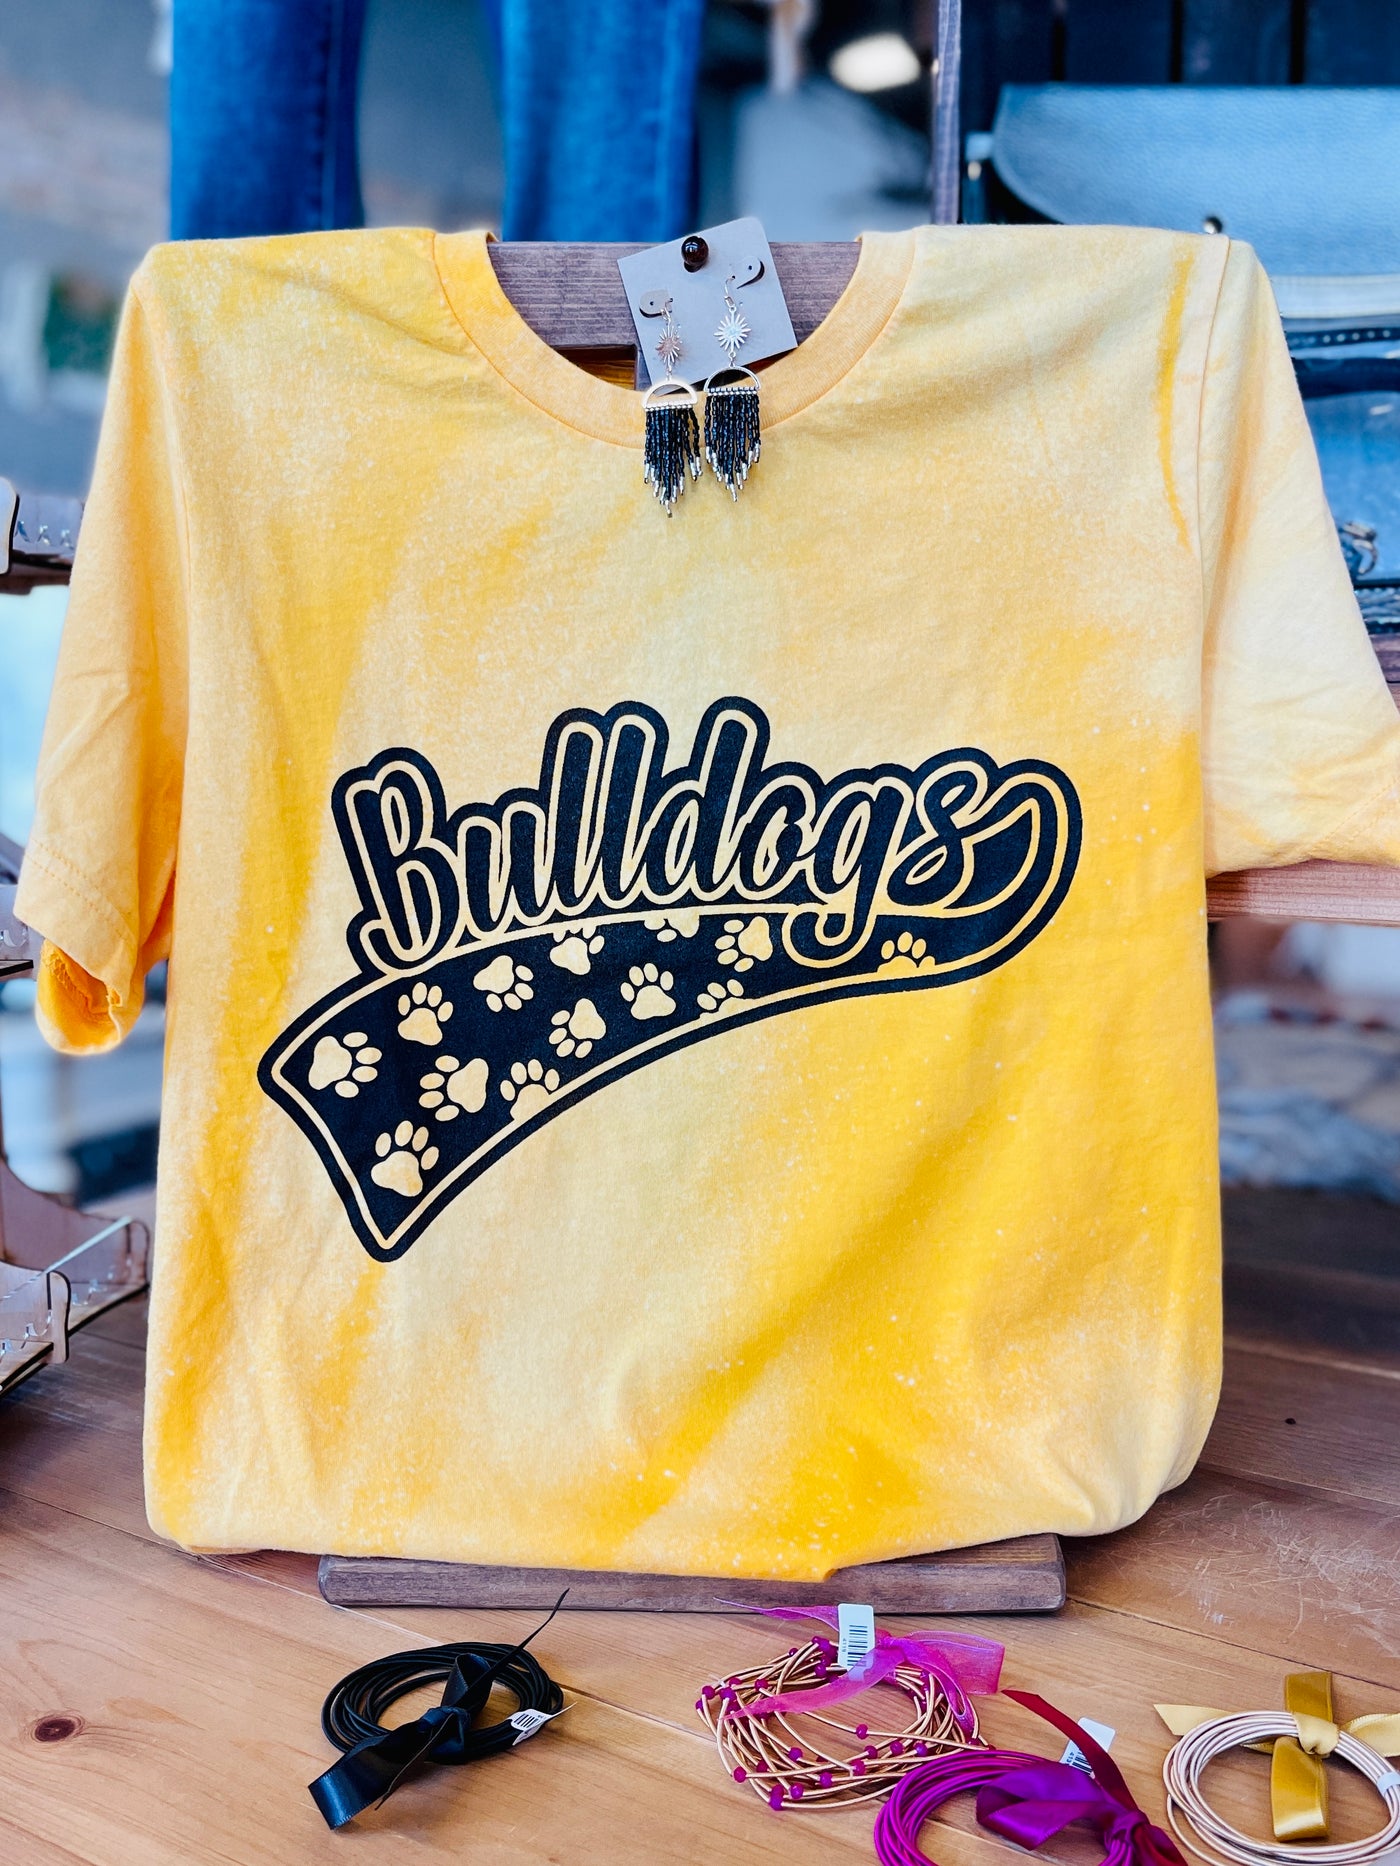 Bulldogs Graphic Tee-Harps & Oli-Shop Anchored Bliss Women's Boutique Clothing Store